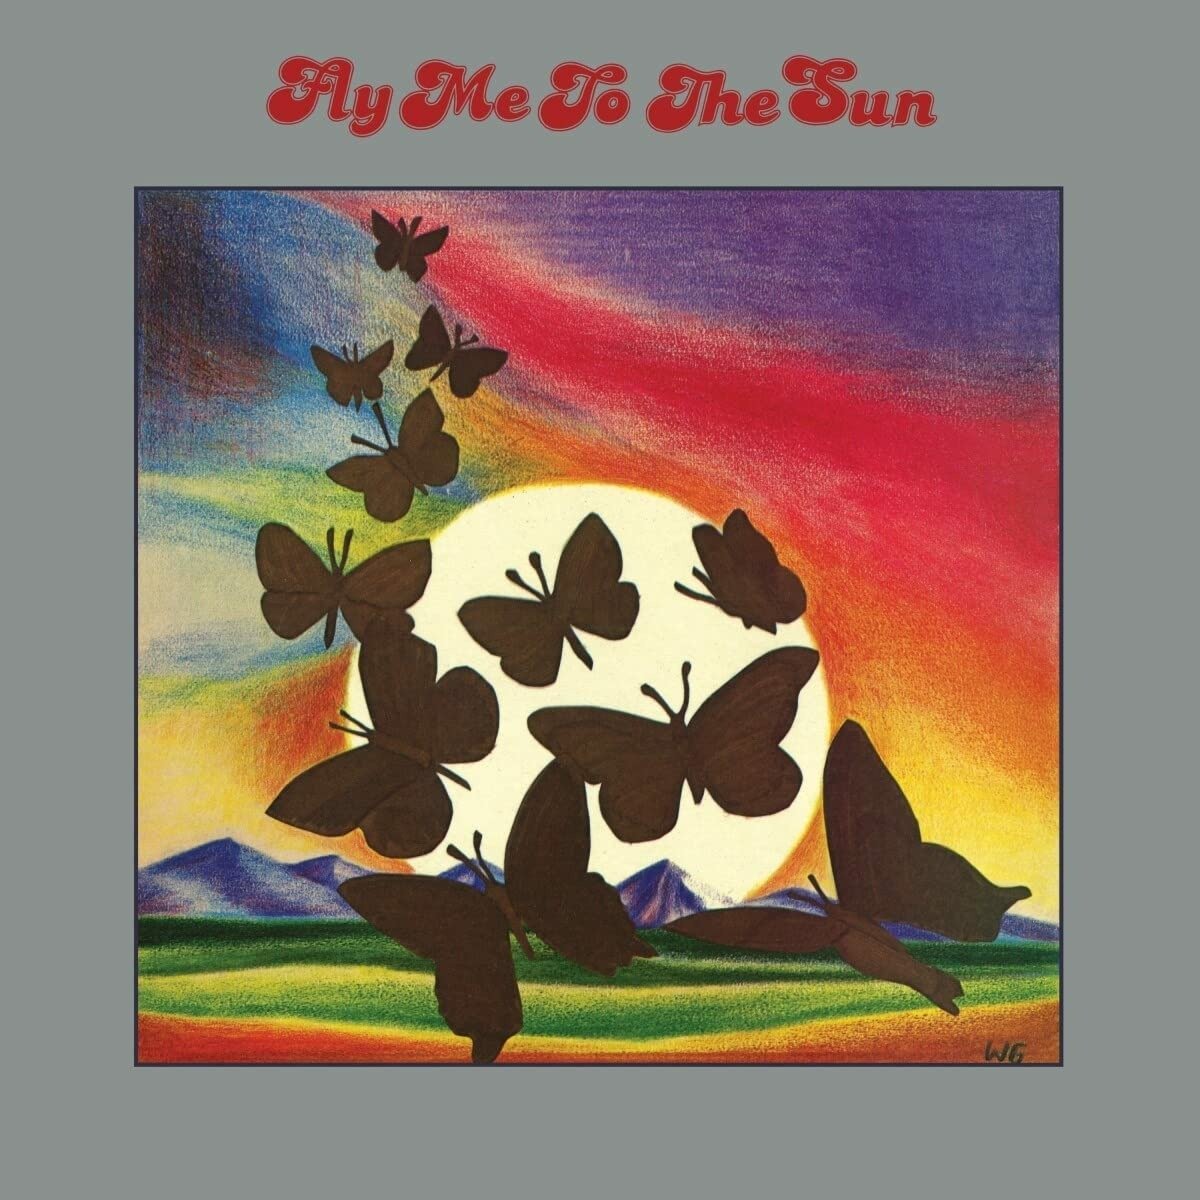 CD Shop - MARKO, ANDRZEJ / ANDRE MI FLY ME TO THE SUN